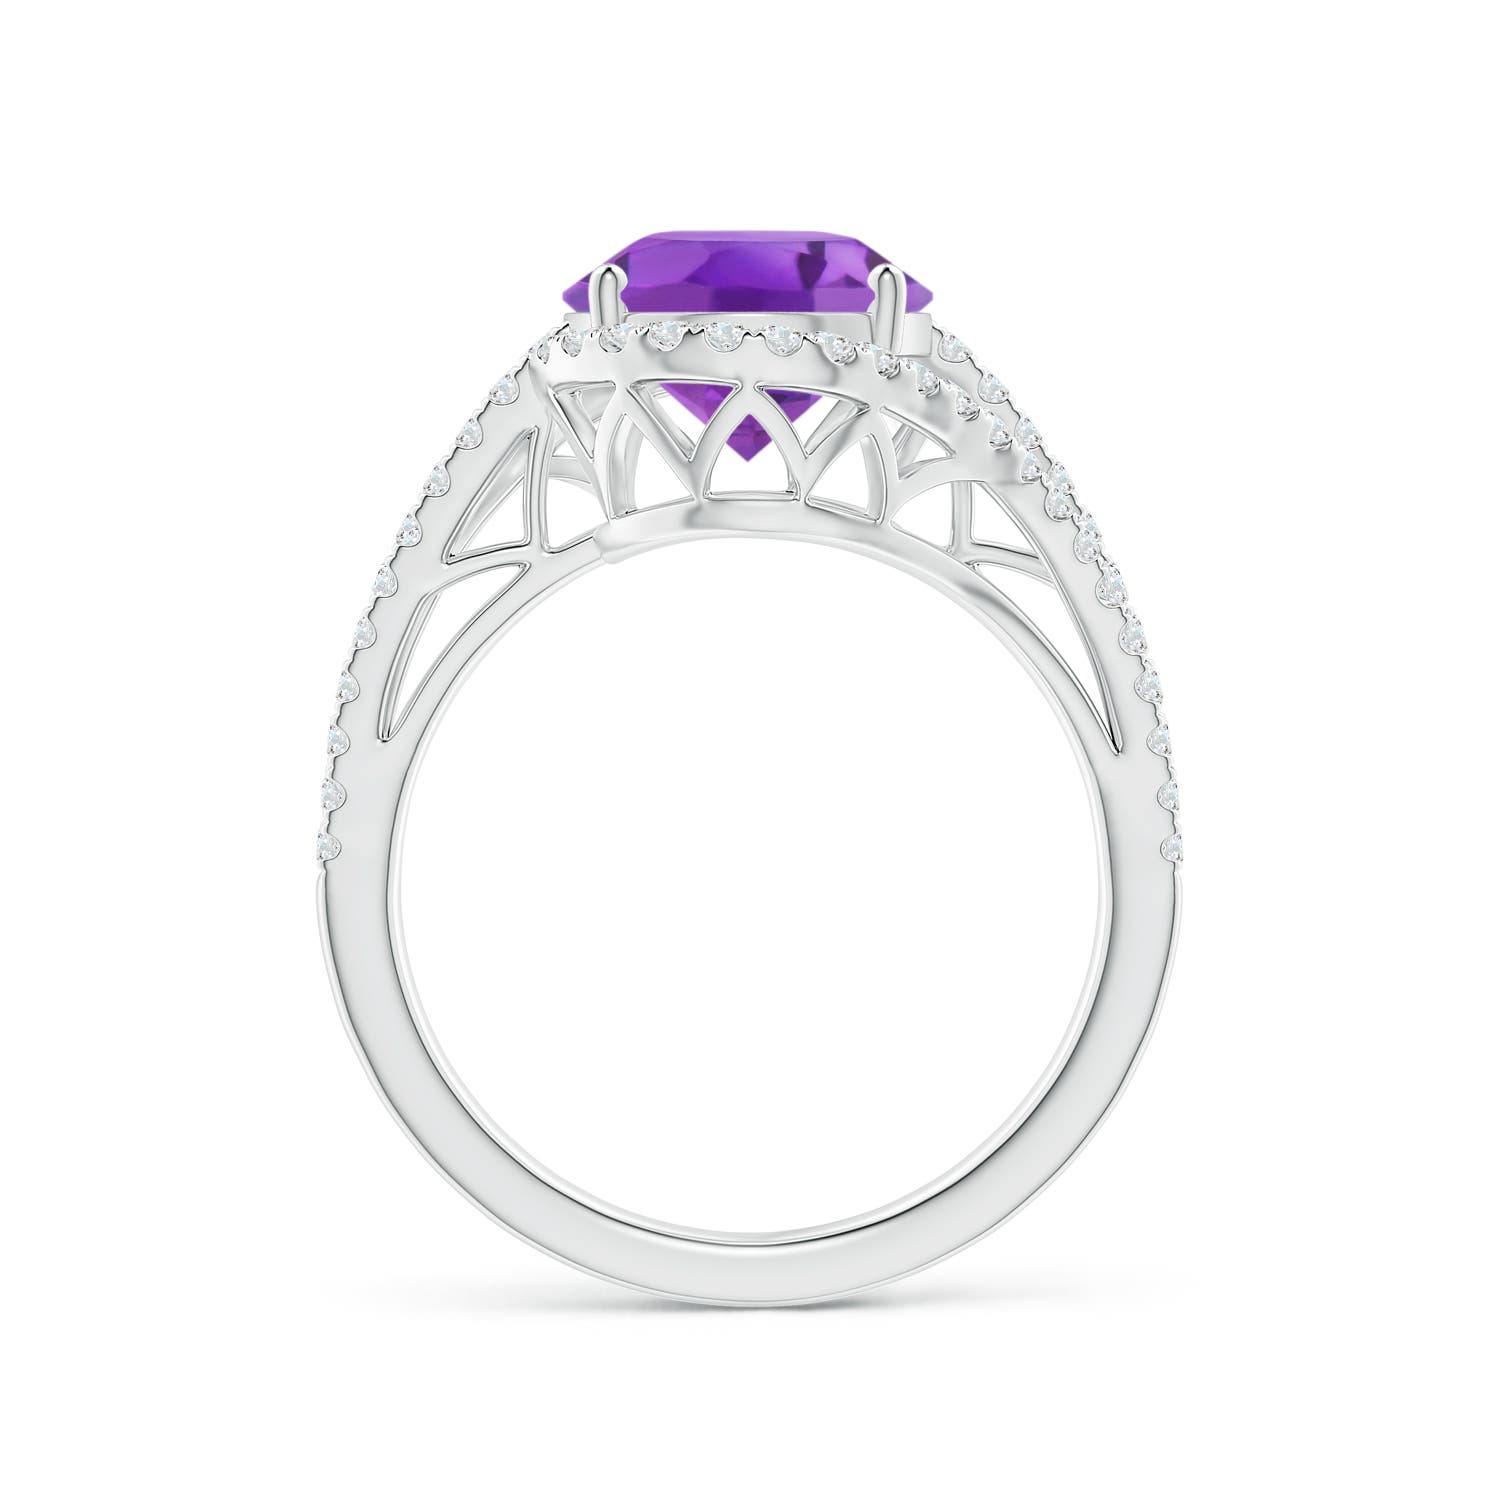 AA - Amethyst / 3.65 CT / 14 KT White Gold